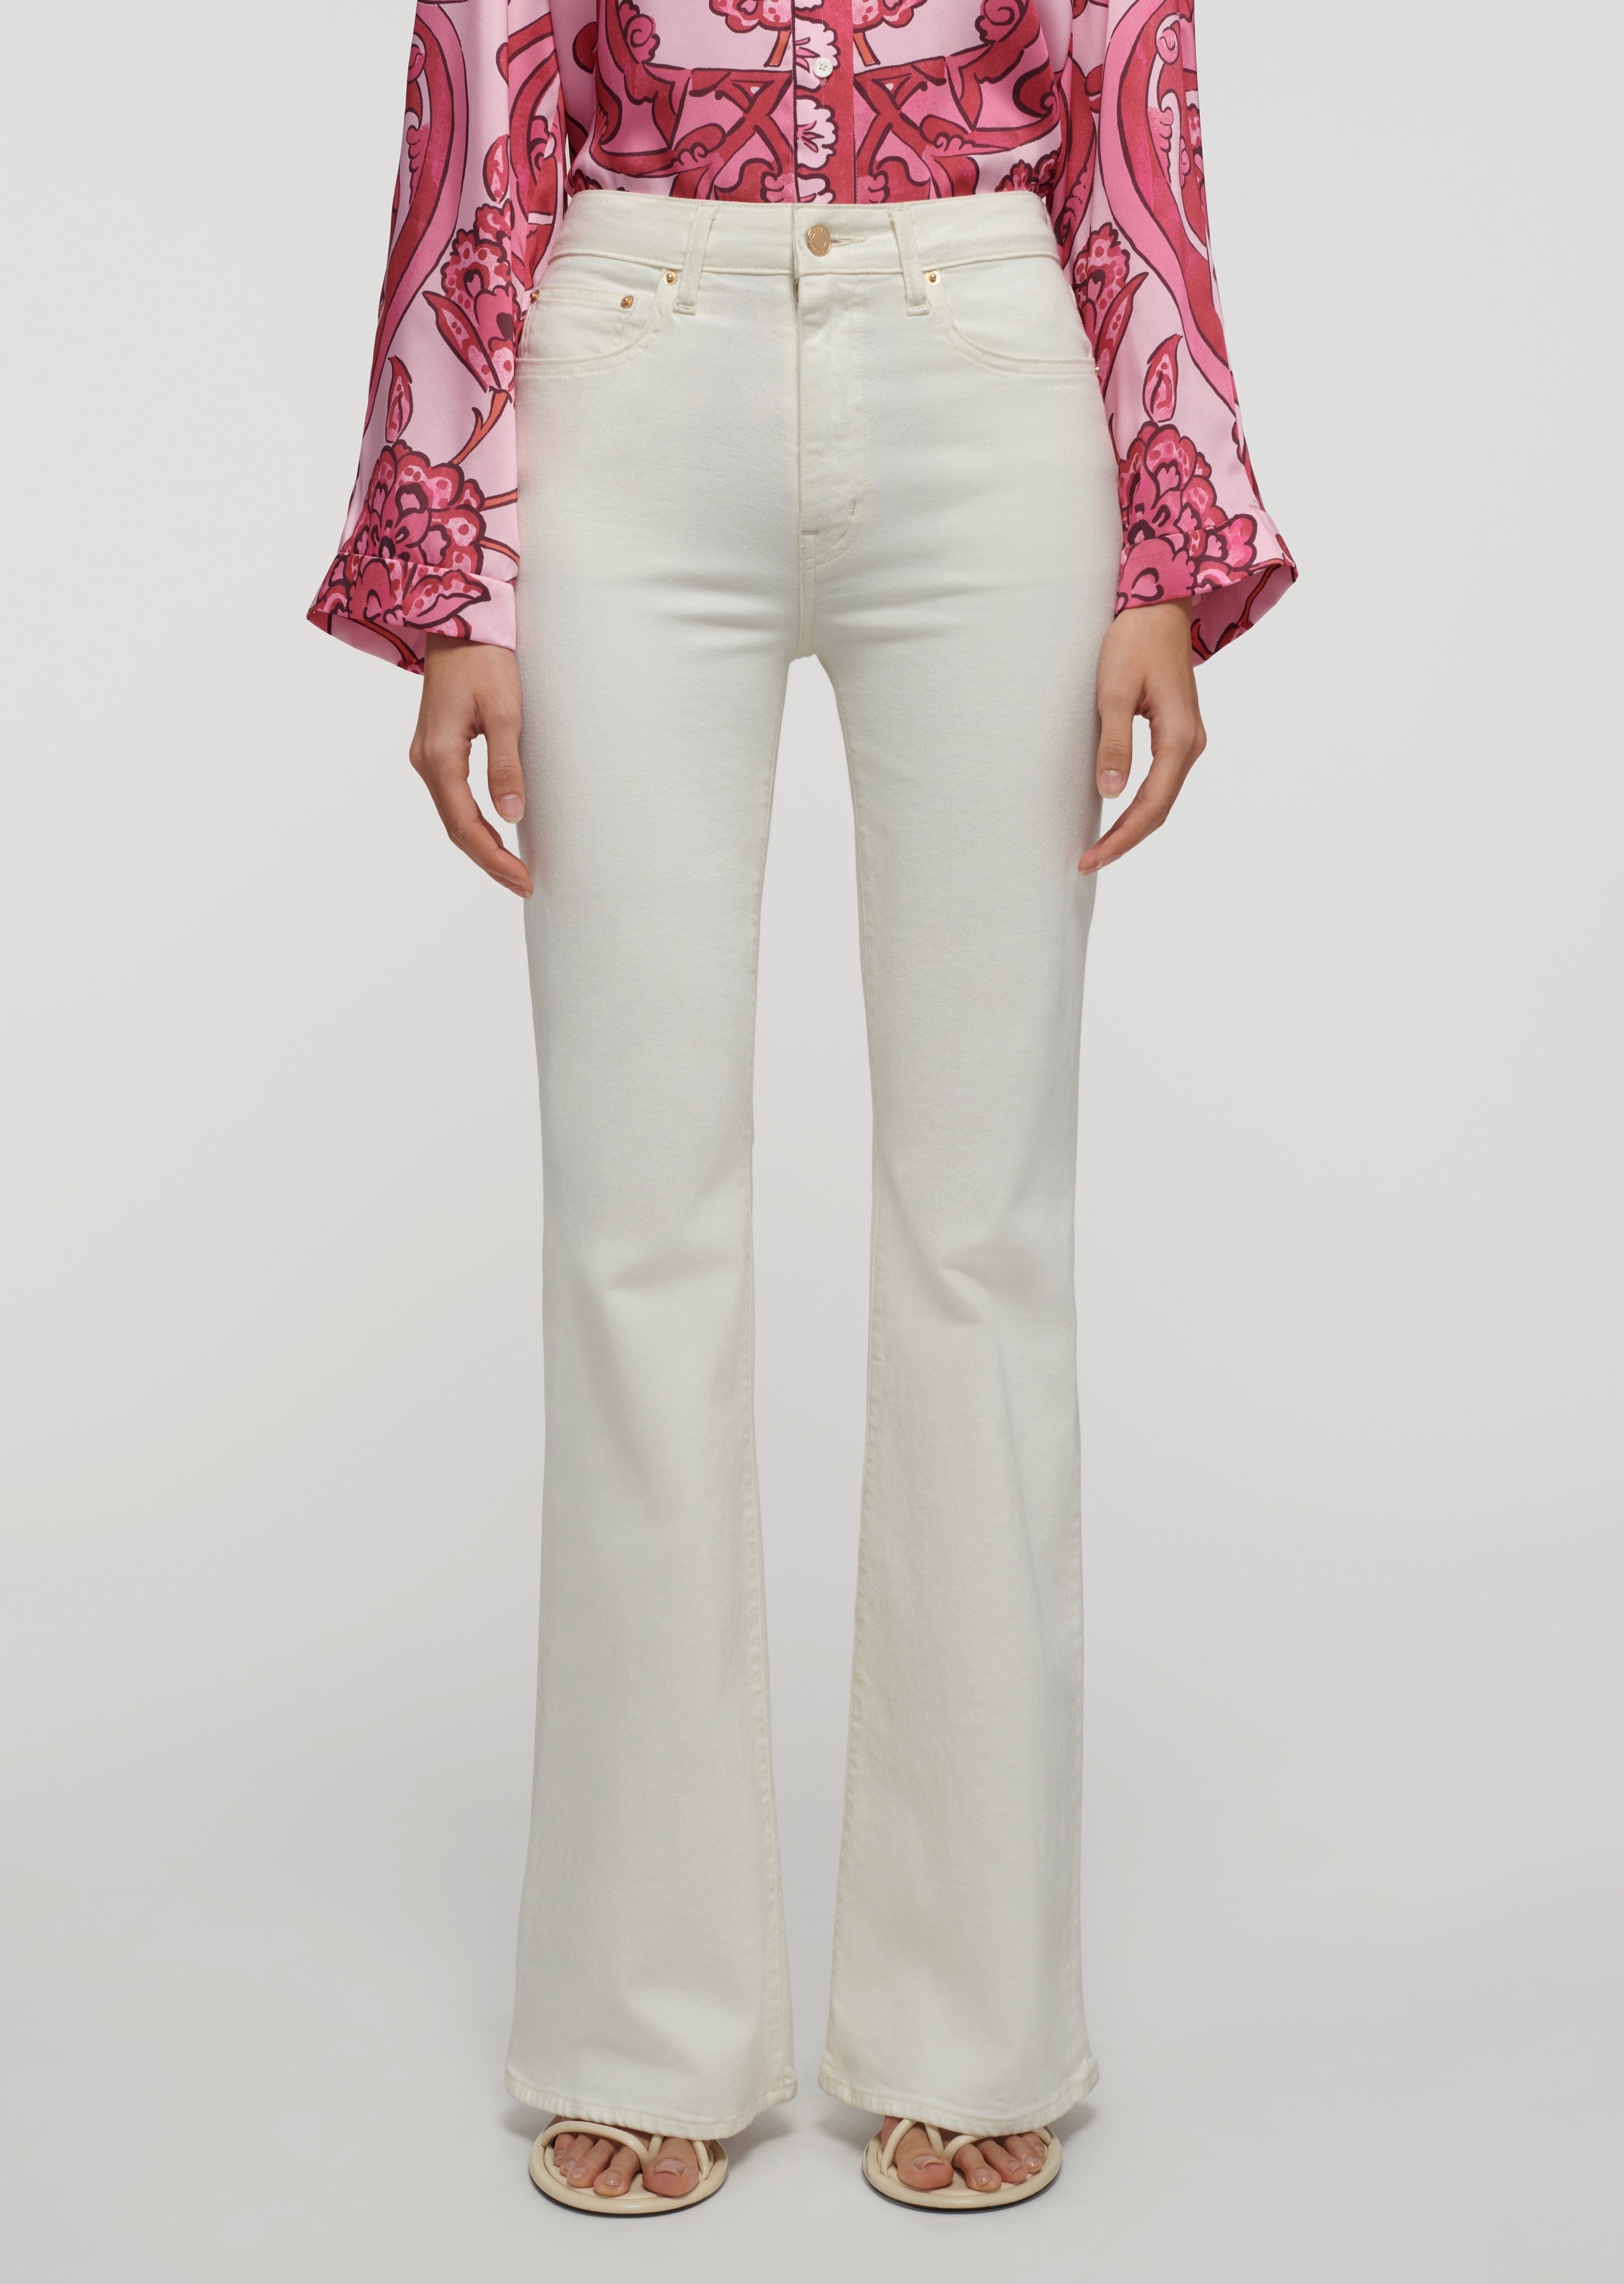 HARLOW HIGHRISE PRINT FLARE PANT - CLEARANCE